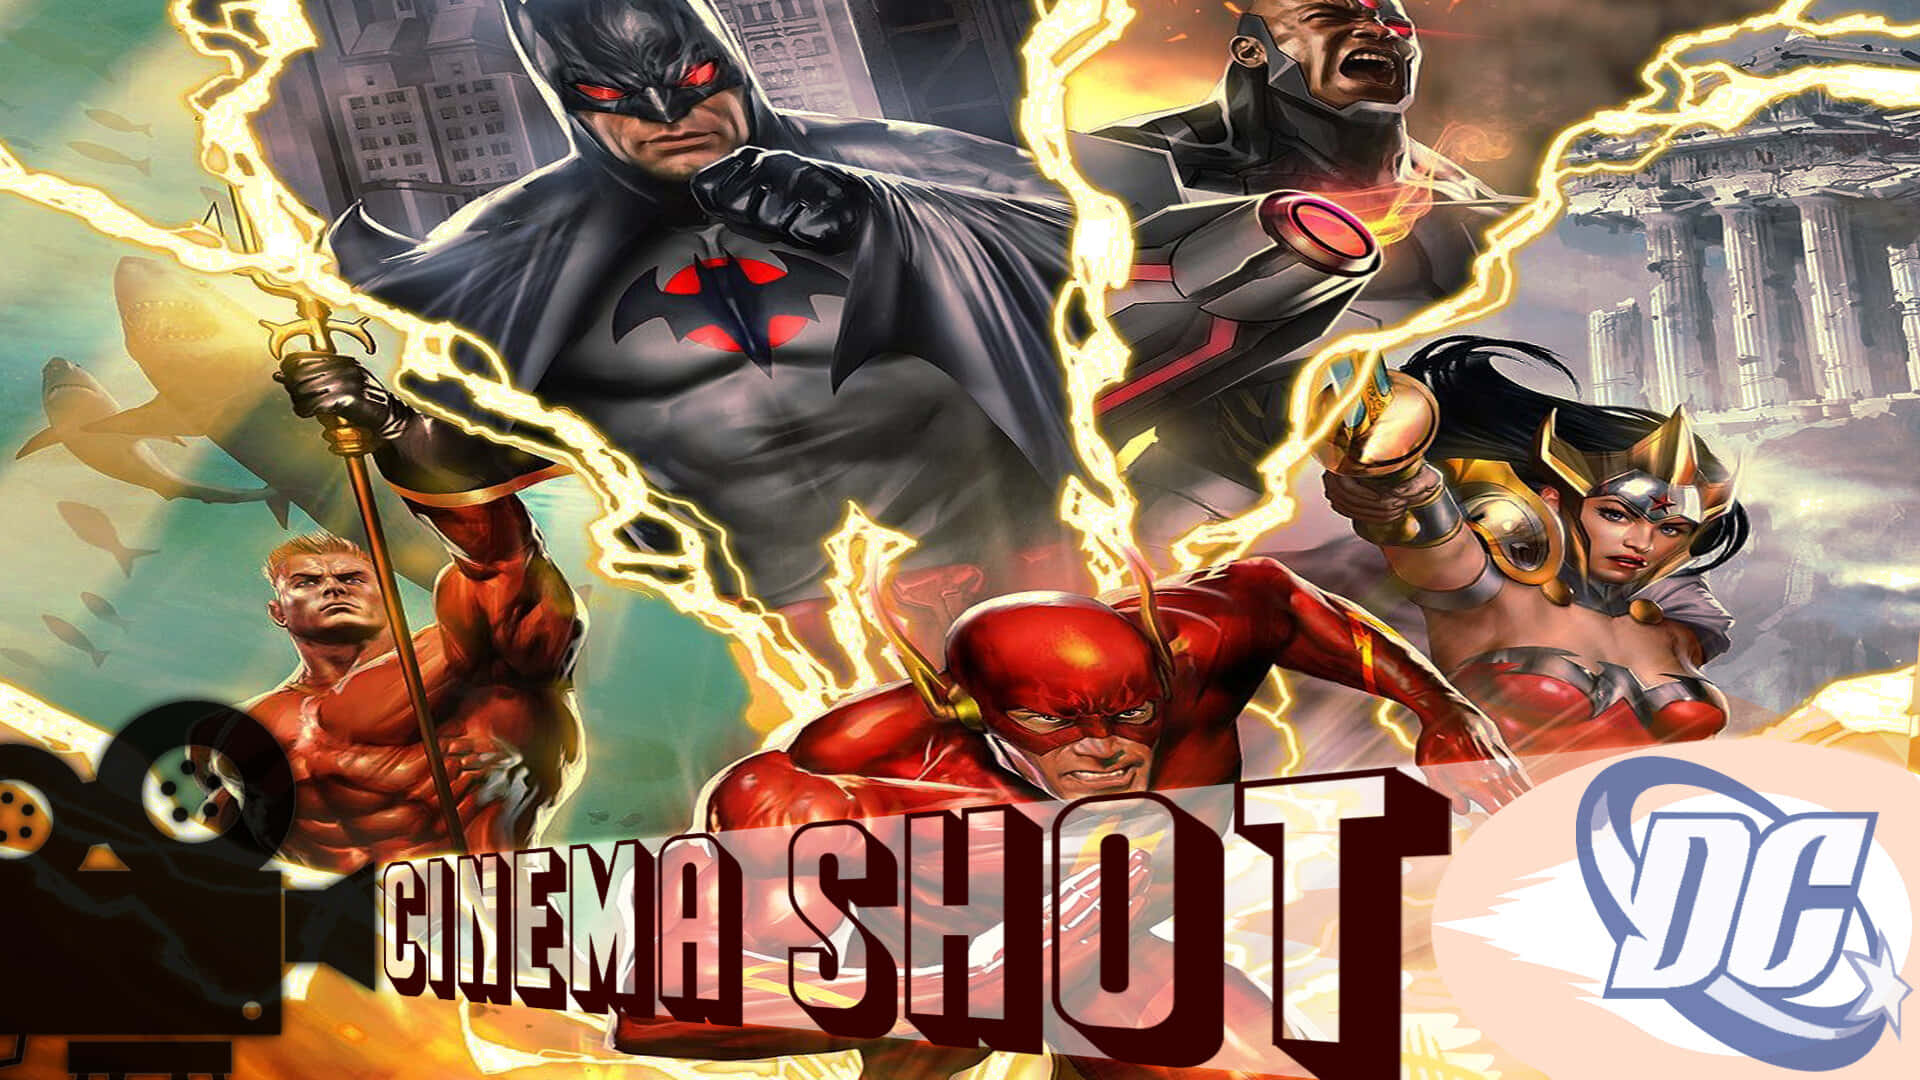 The Flash and the Justice League in Flashpoint Paradox Wallpaper